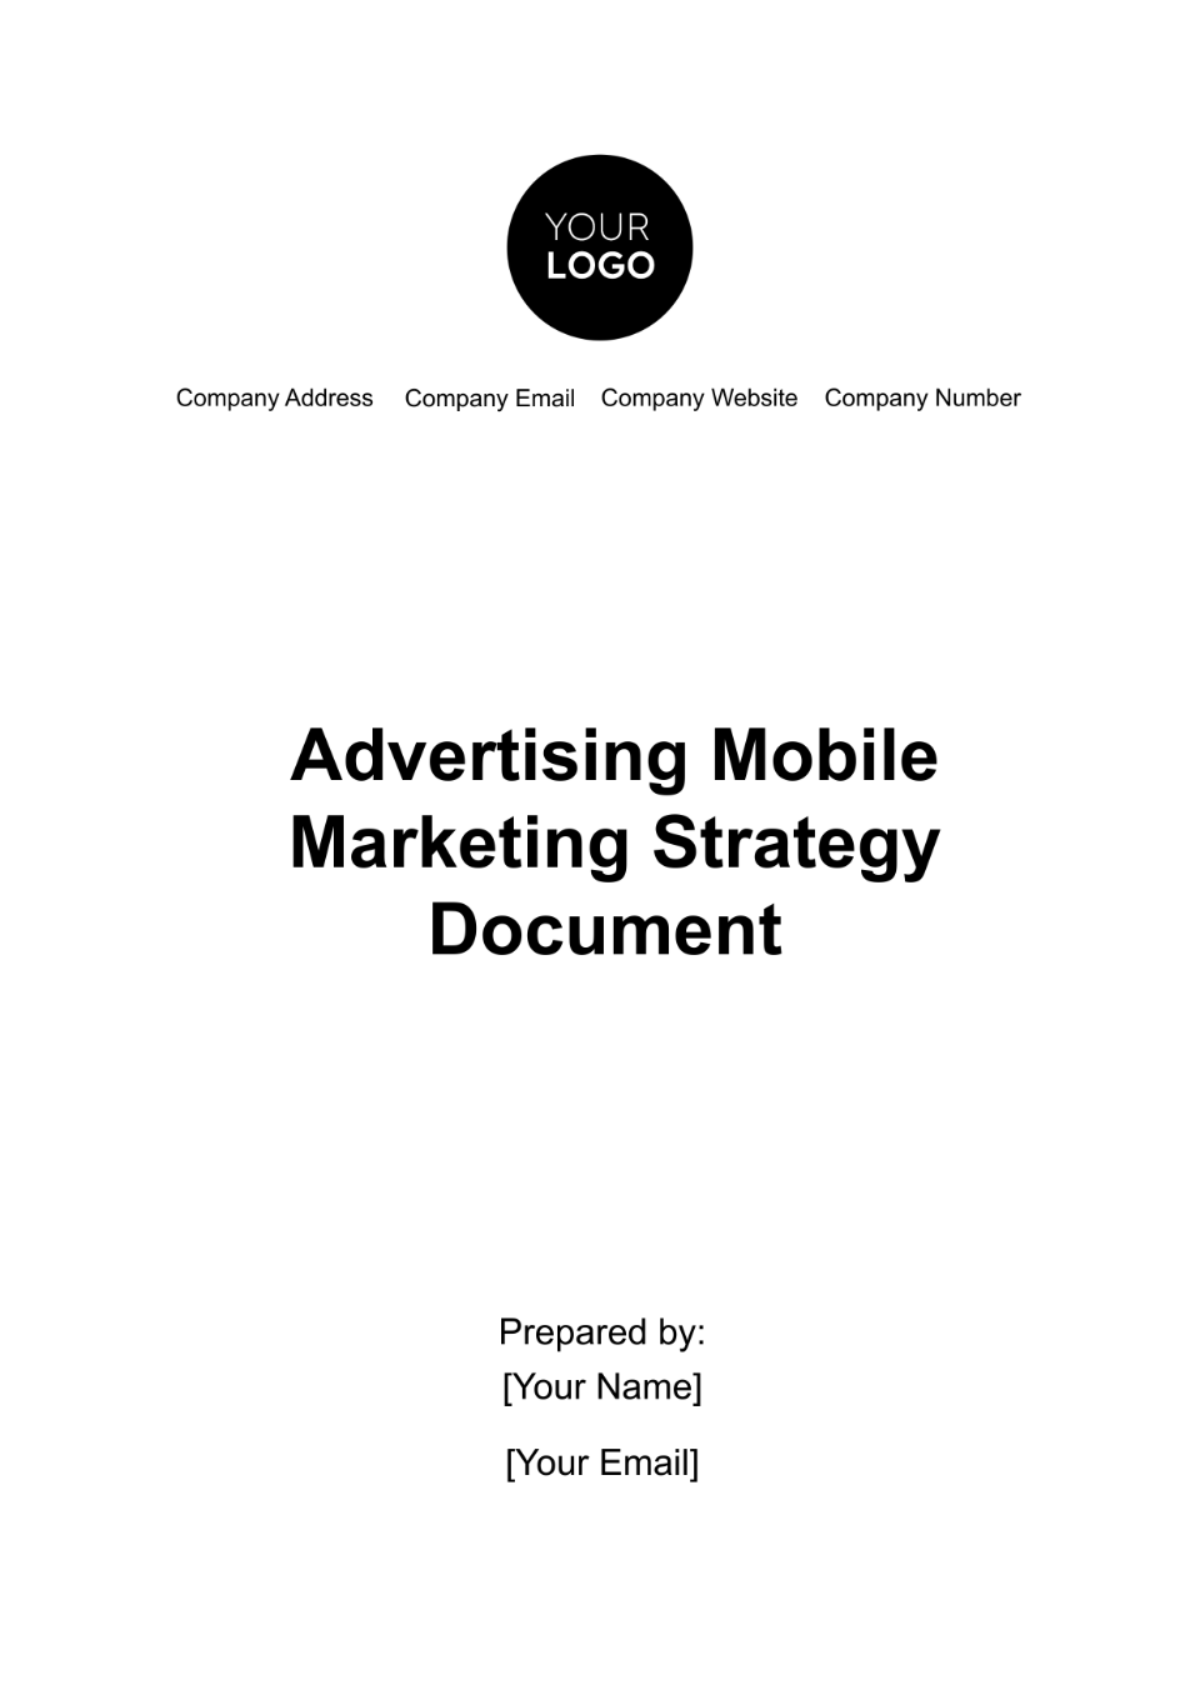 Advertising Mobile Marketing Strategy Document